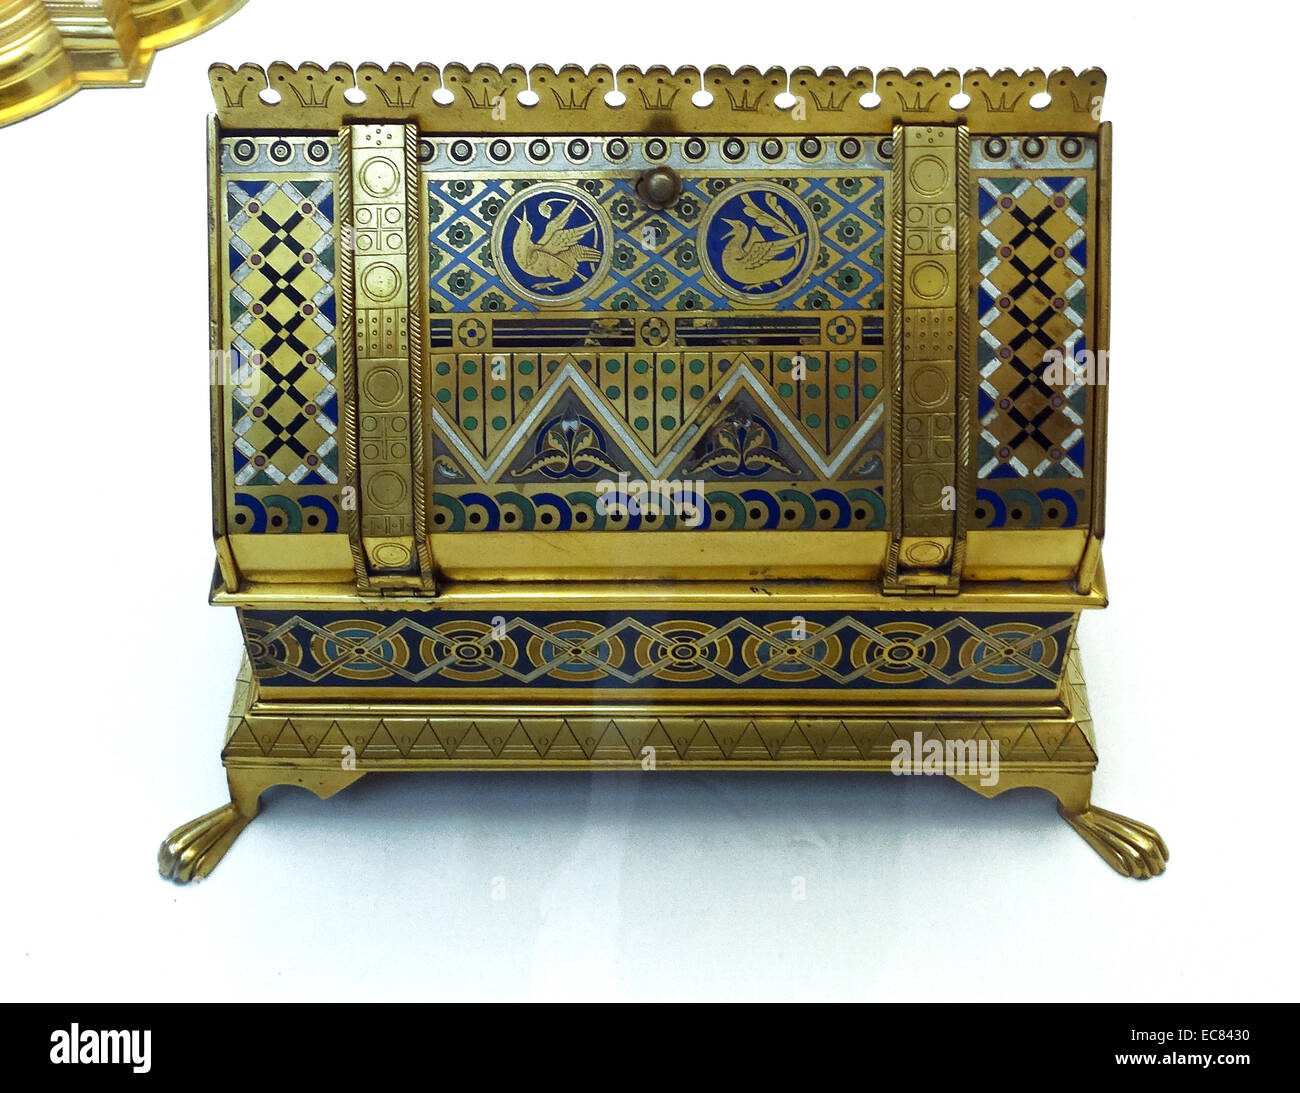 Augustus Welby Northmore Pugin  Decorative grill from the Palace